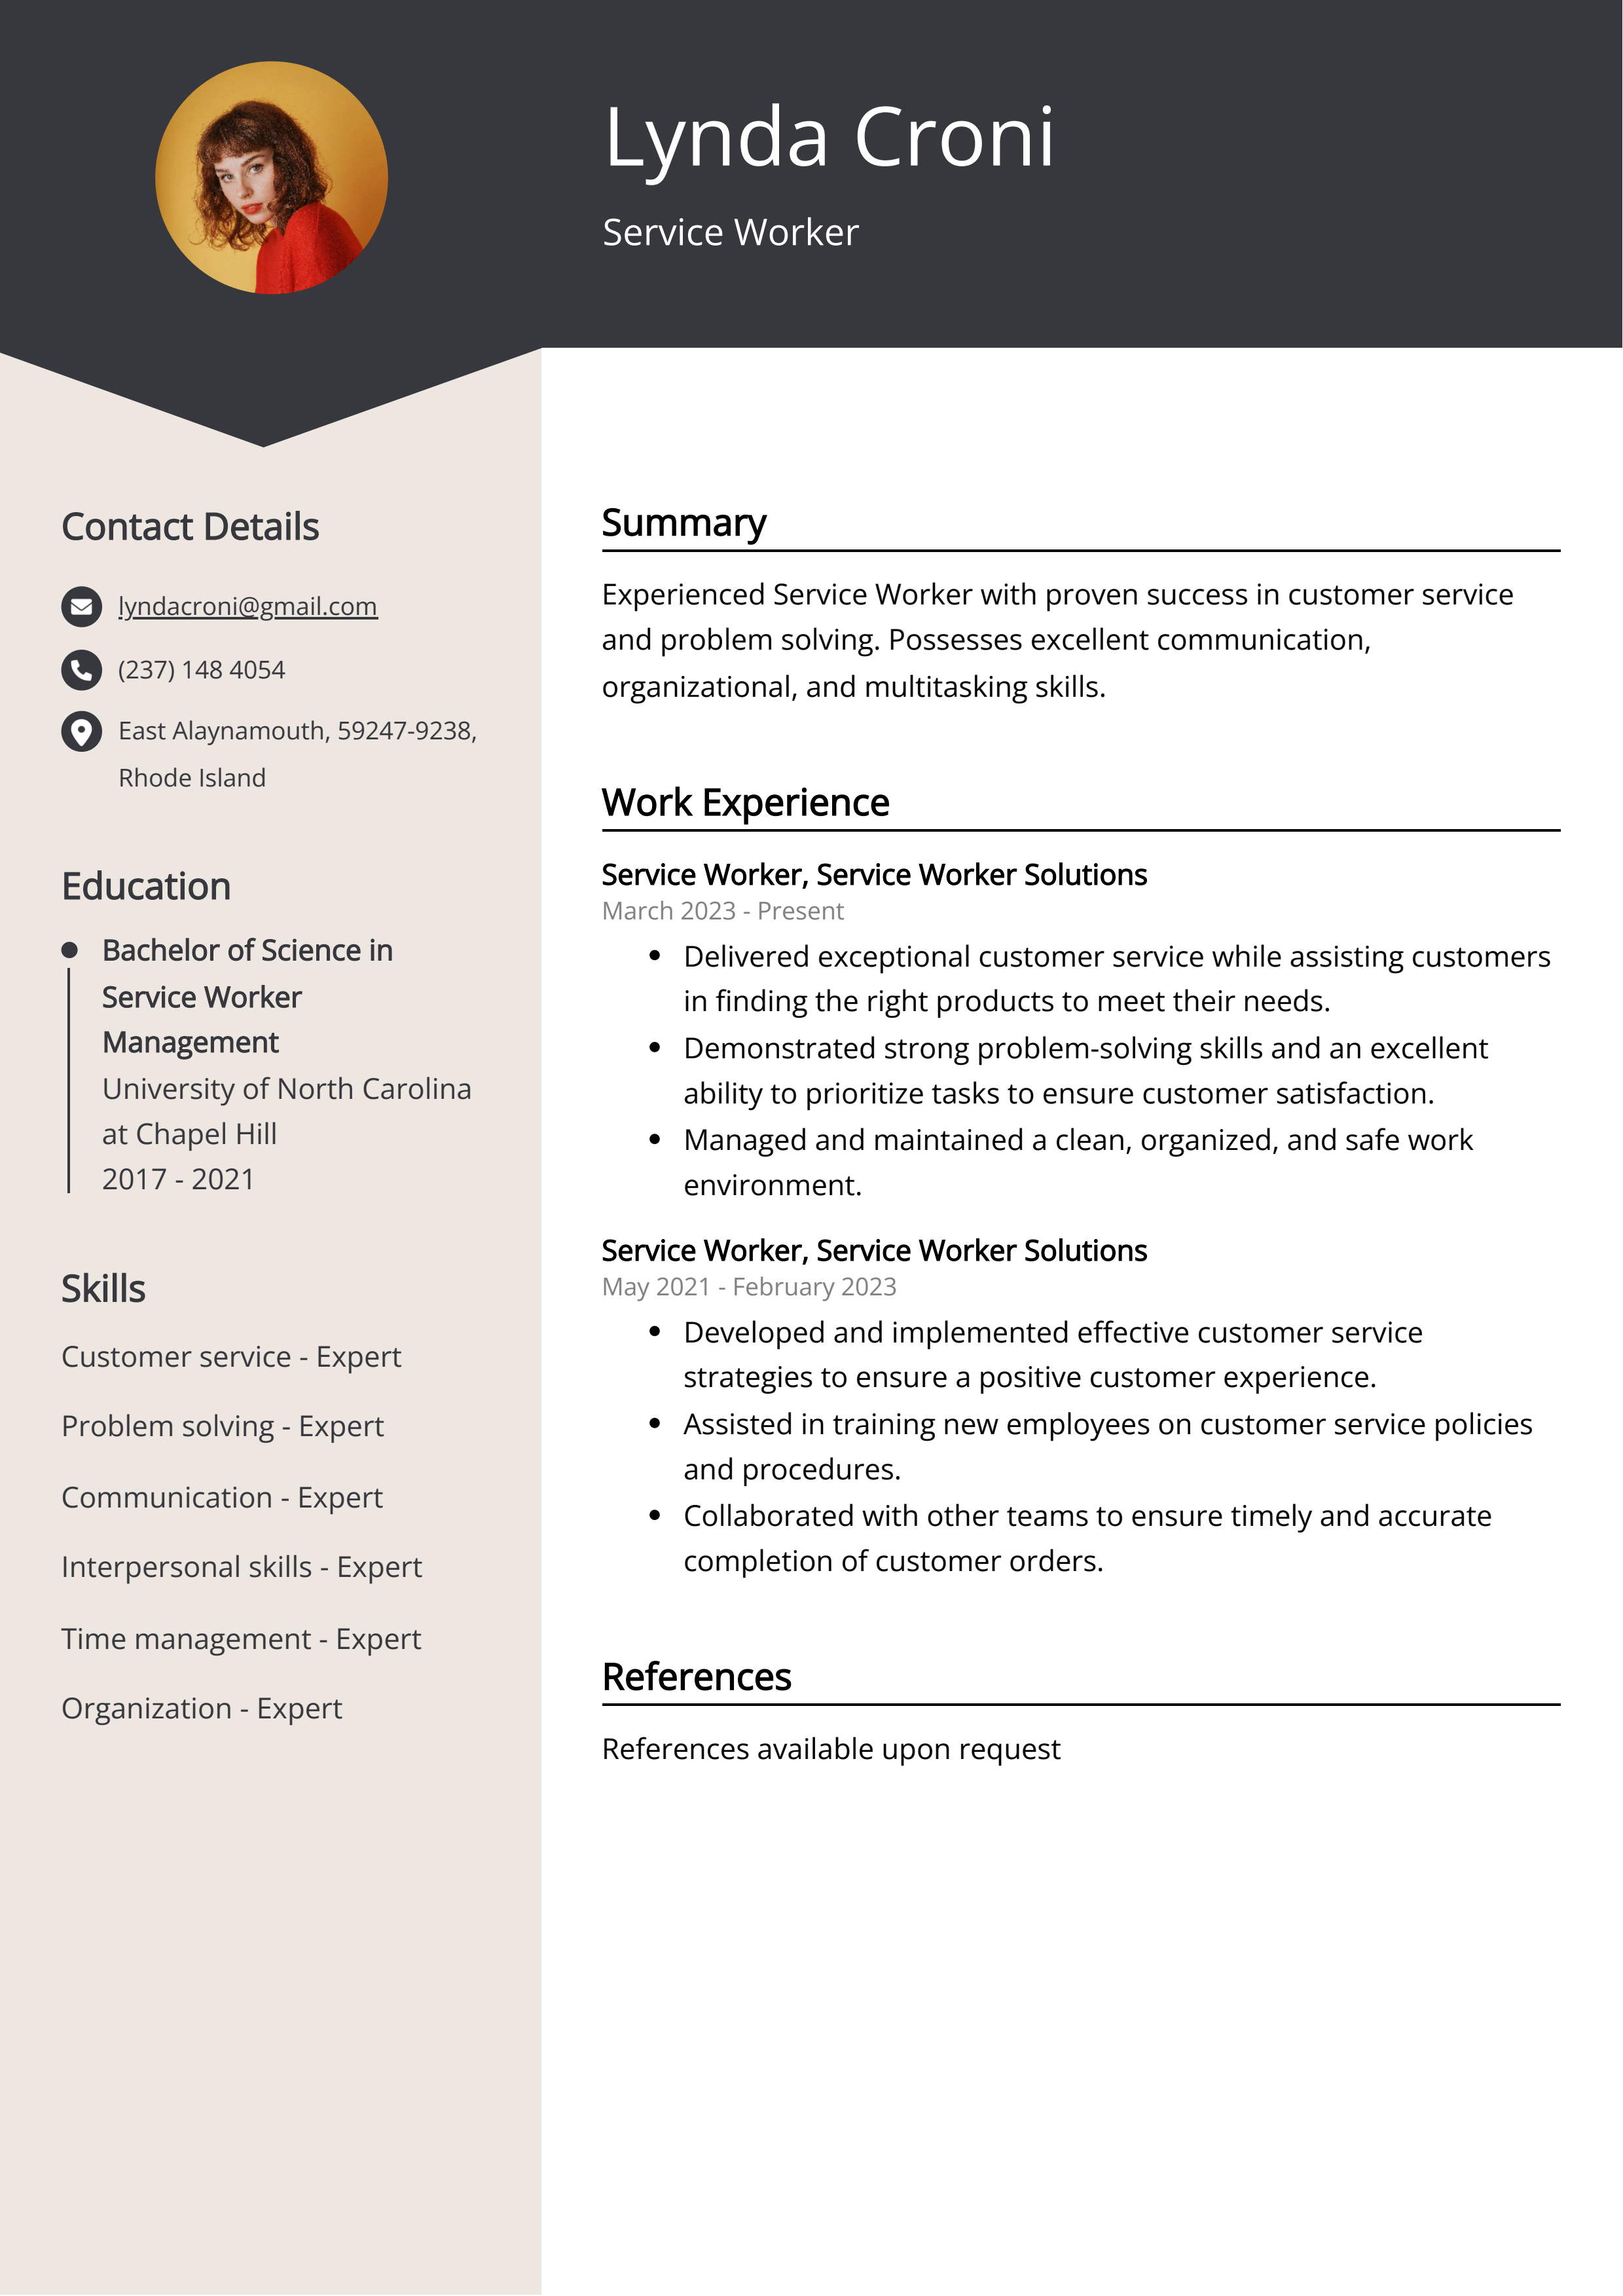 Service Worker CV Example